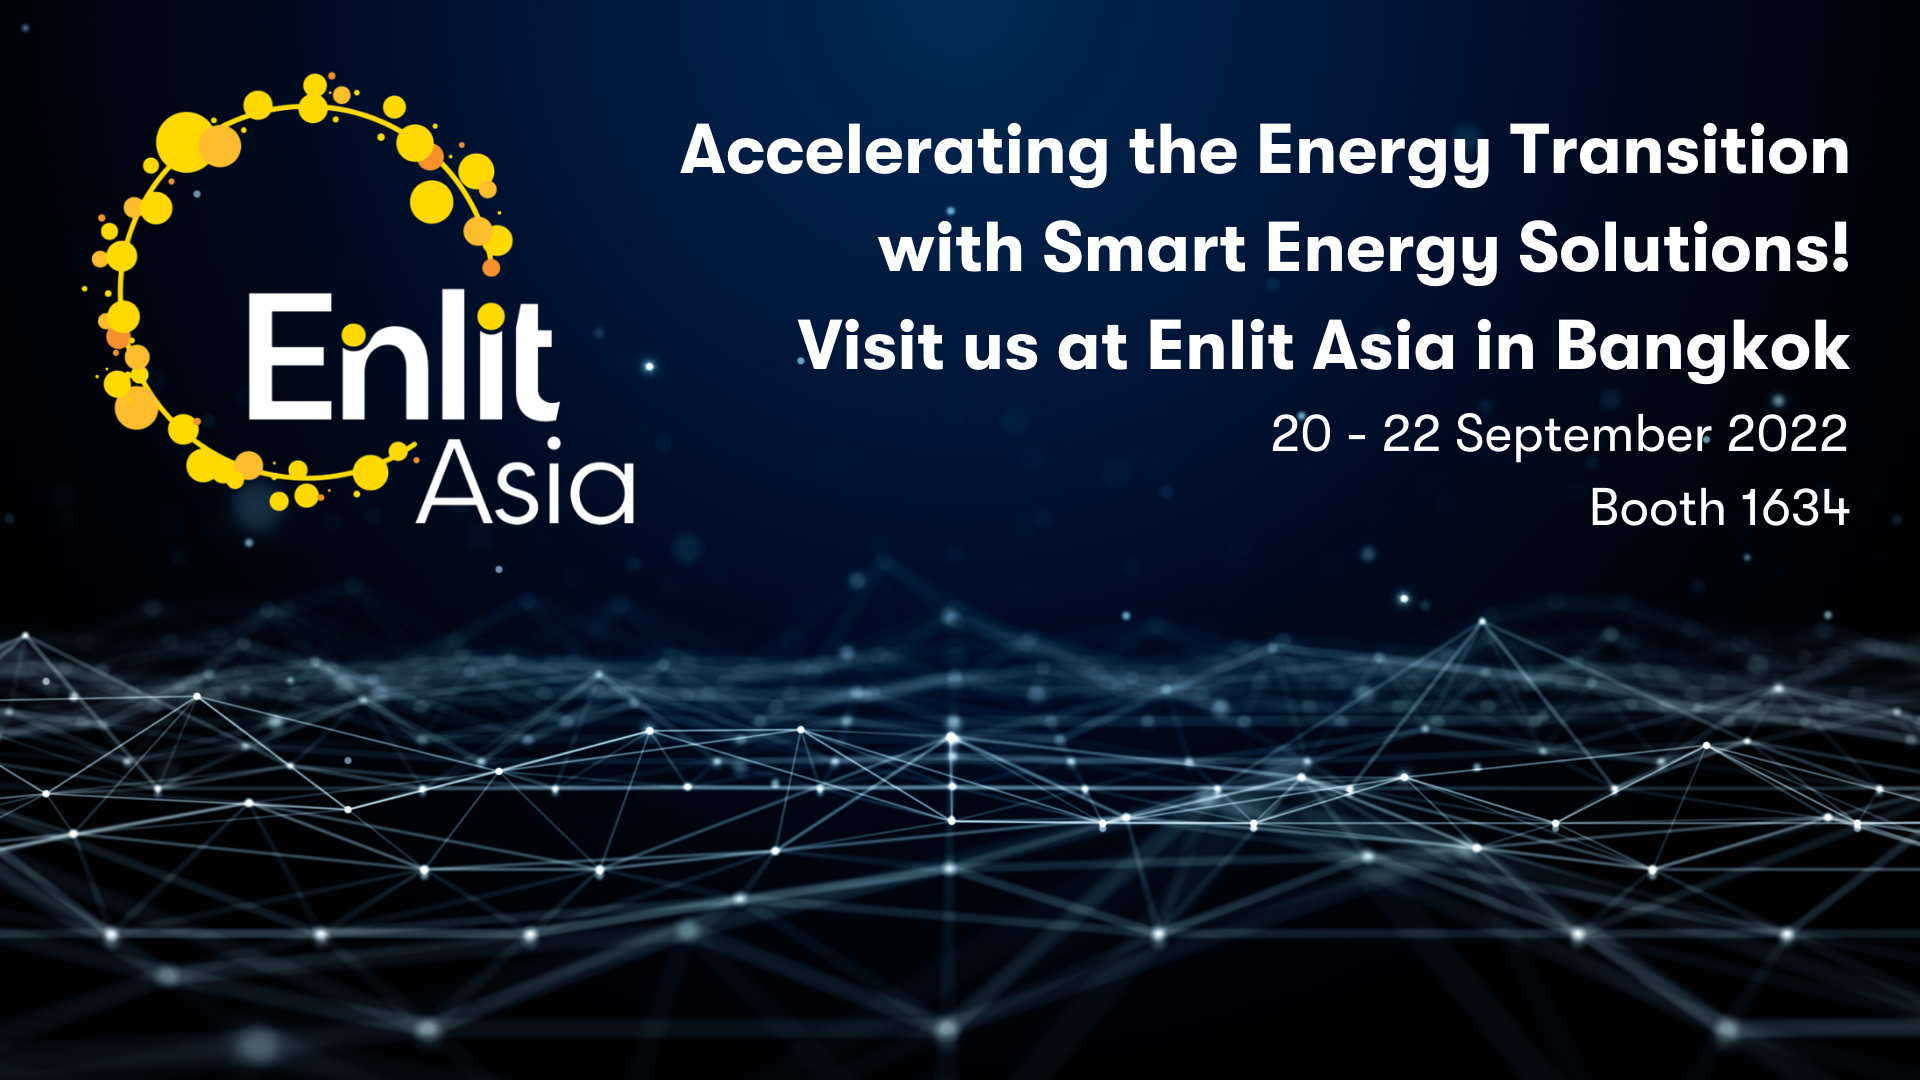 uploads/pics/https://waste-to-energy.iqony.energy/uploads/pics/Accelerating_the_Energy_Transition_with_Smart_Digital_Solutions_Visit_us_at_Enlit_Asia_in_Bangkok__1__09.png